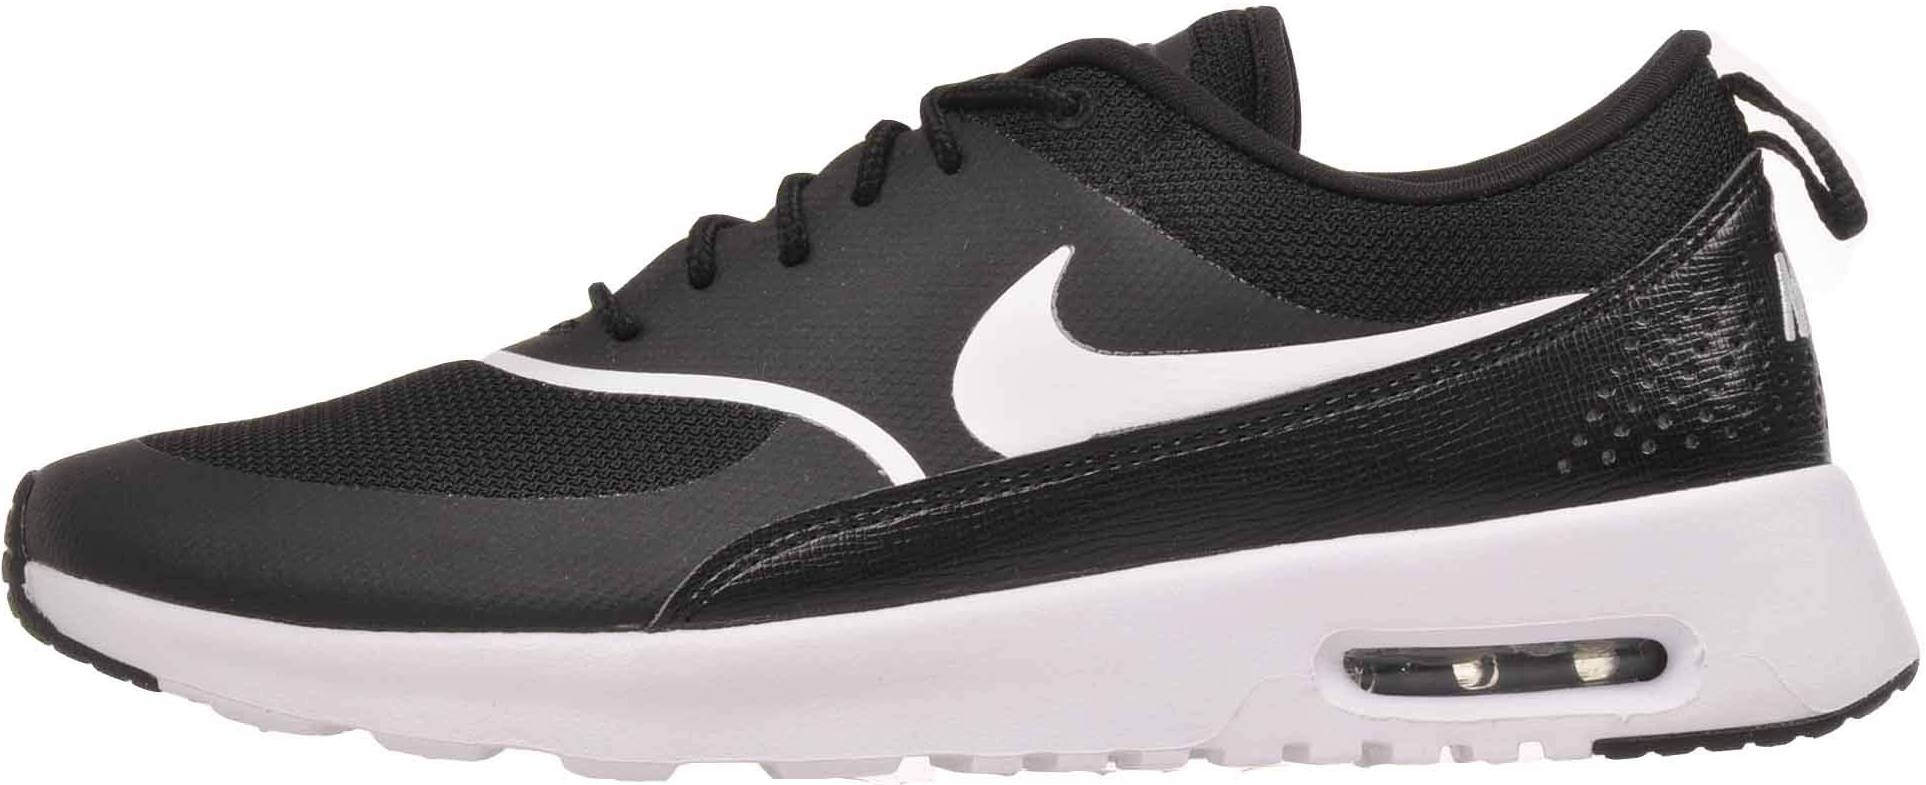 packet Political innovation Nike Air Max Thea sneakers in 20+ colors (only $55) | RunRepeat